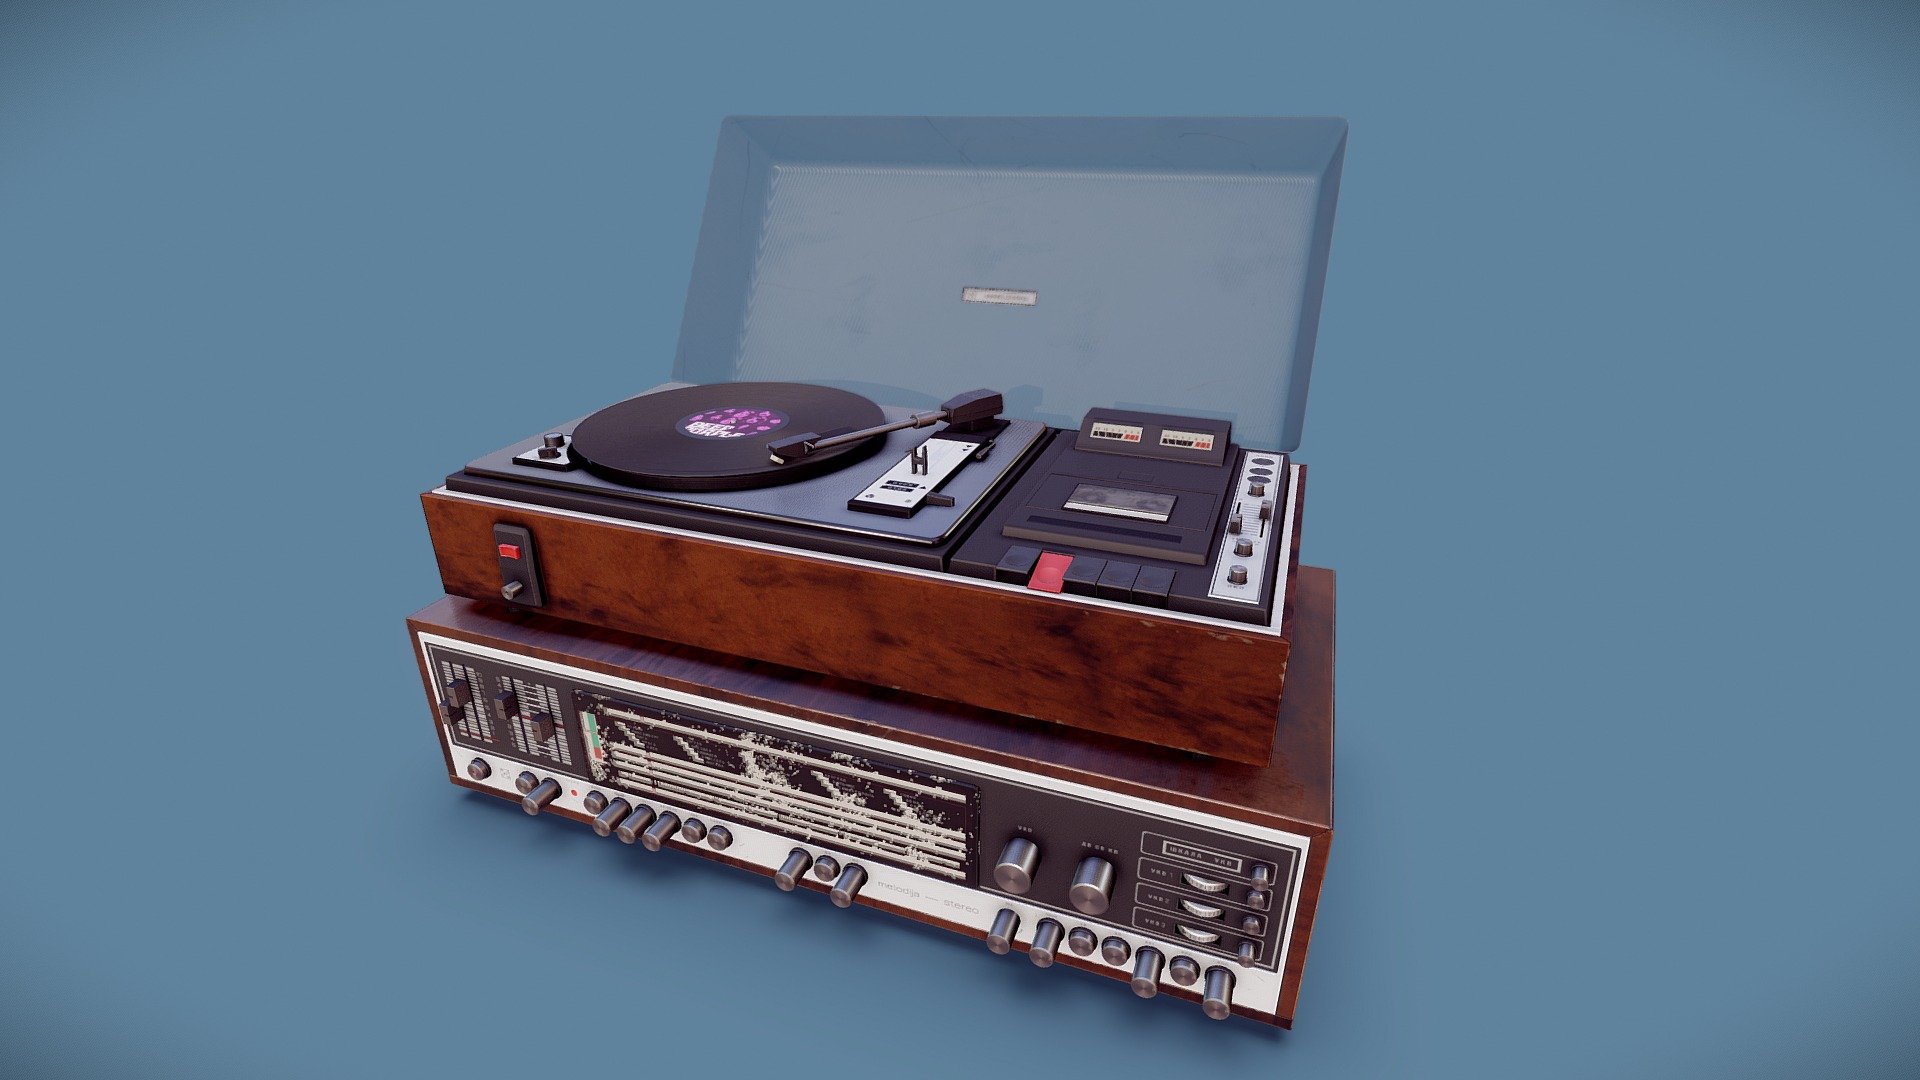 Melodija 105 made in a Soviet era around 1978. It is a turnable, radio and cassette player.






 

Reference images used:

 - Melodija 105 - Download Free 3D model by Warkarma 3d model